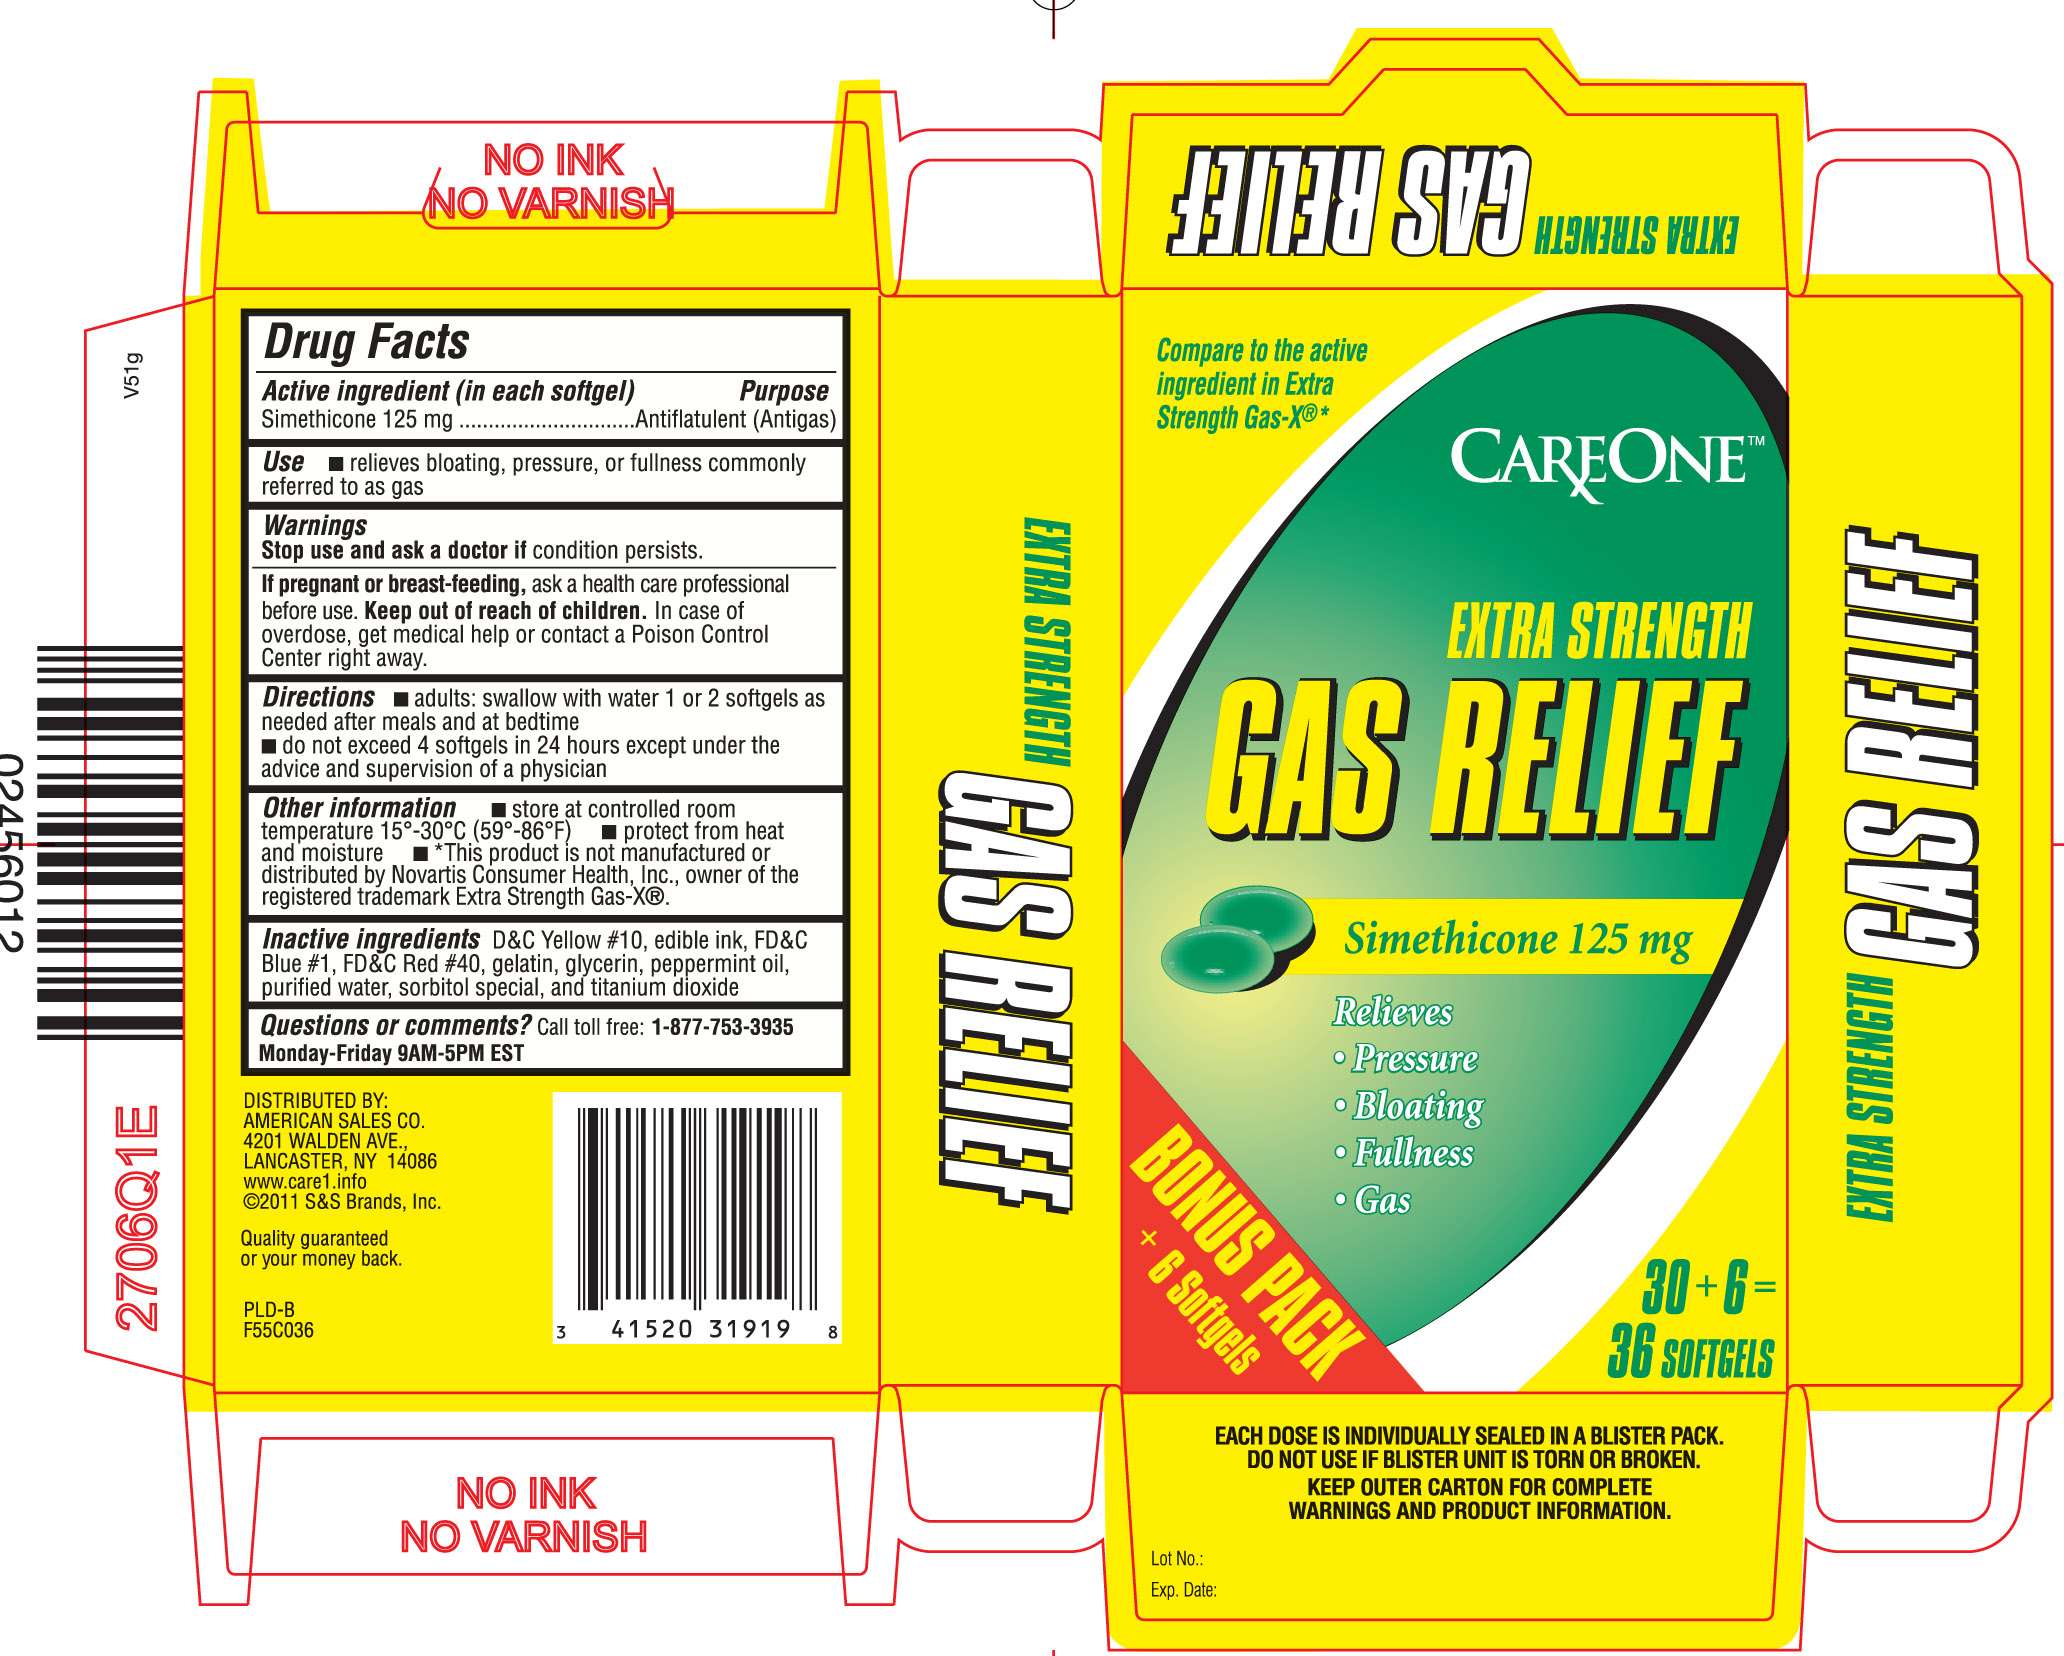 Gas relief